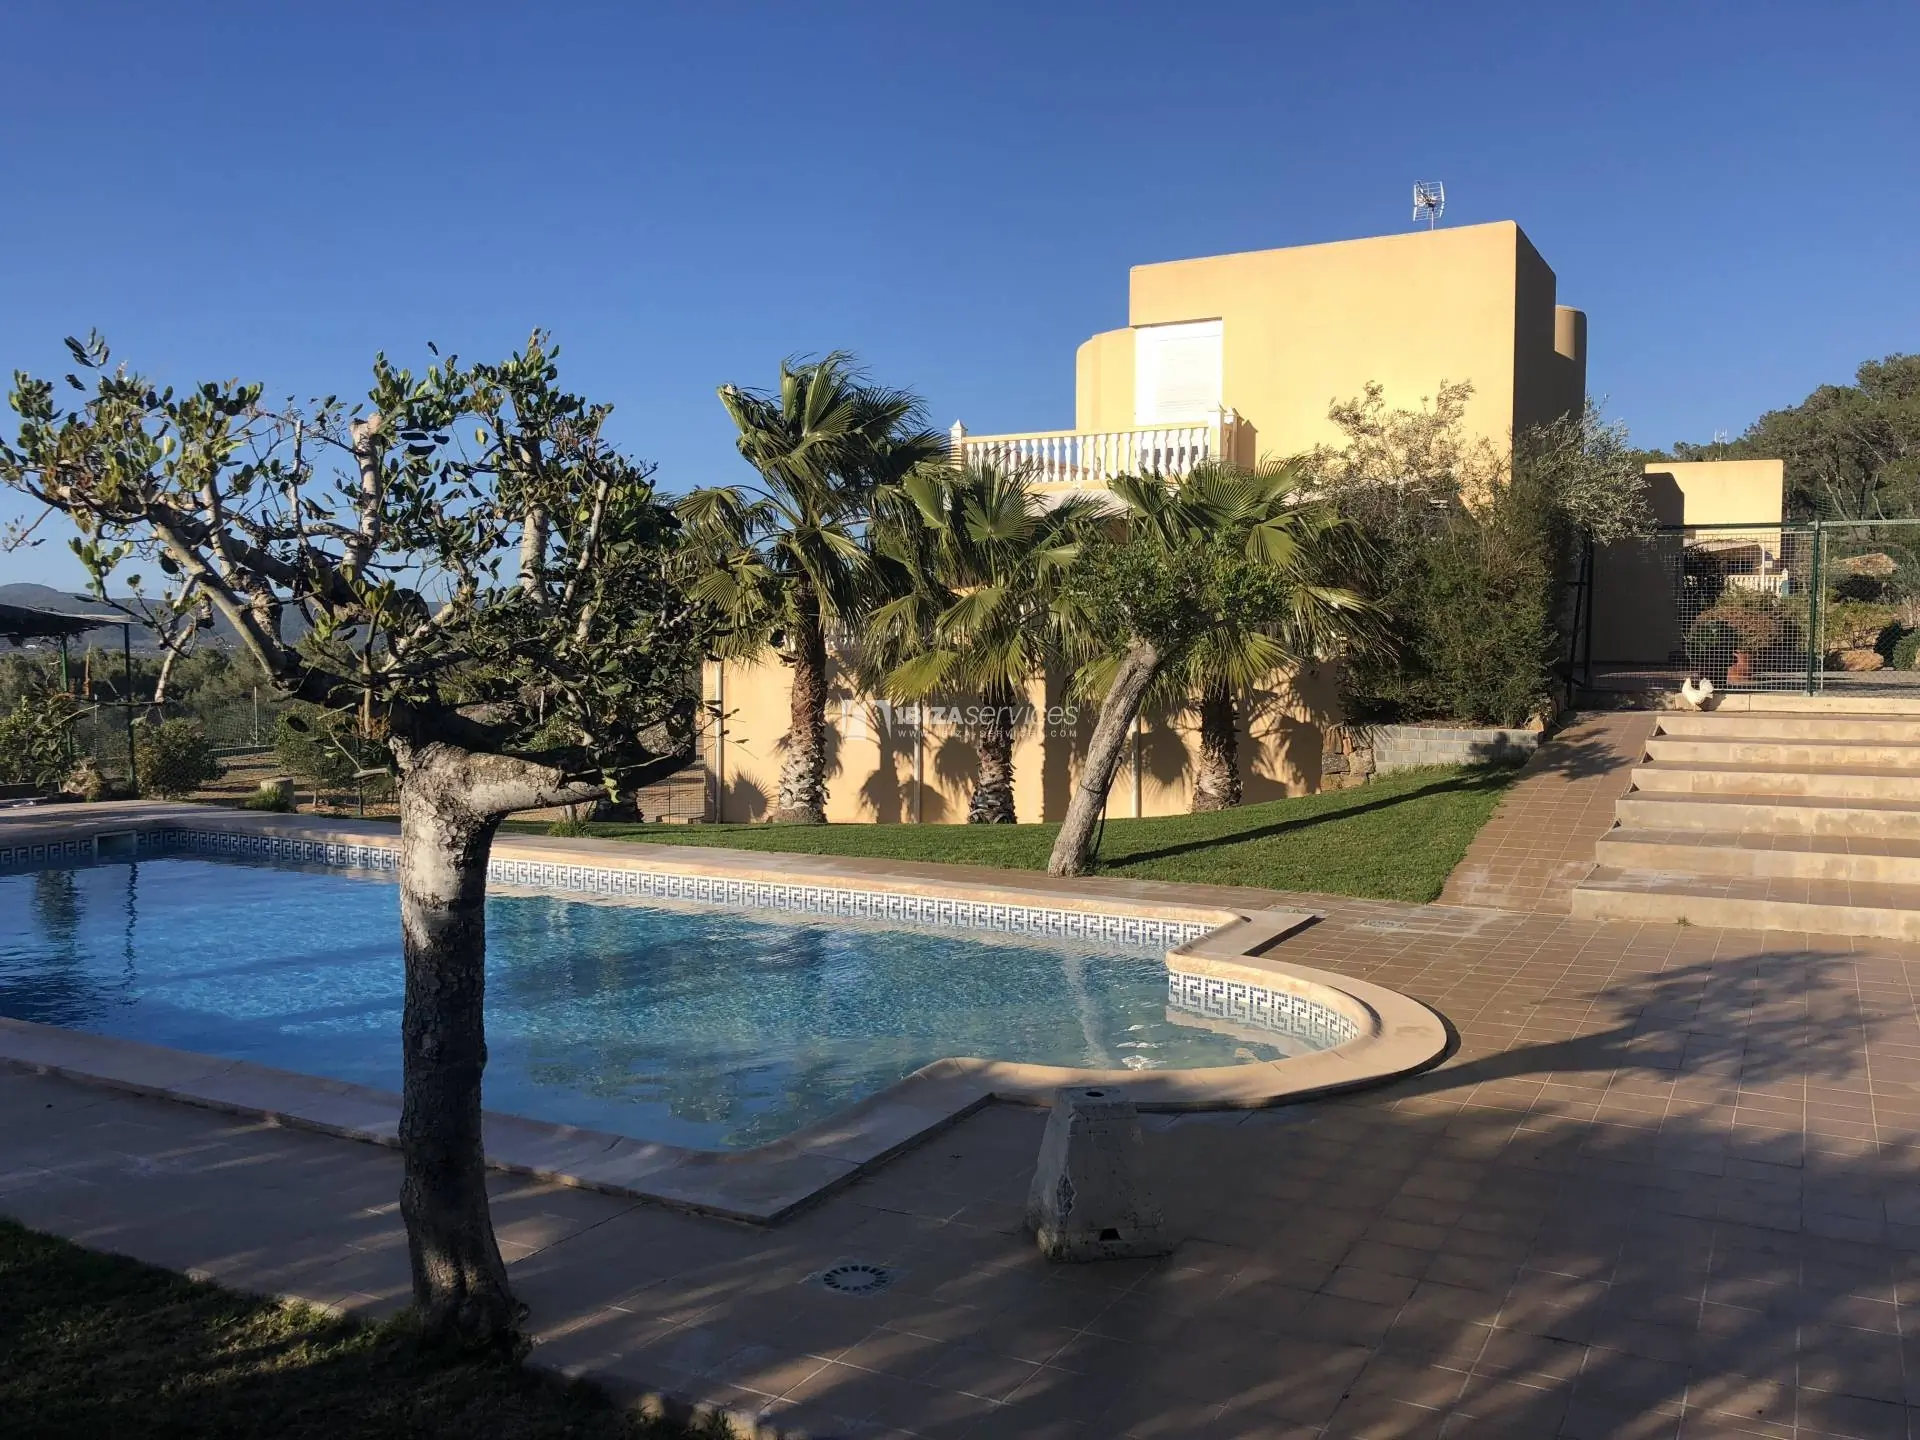 2 villas and a house with pools for sale in Benimussa